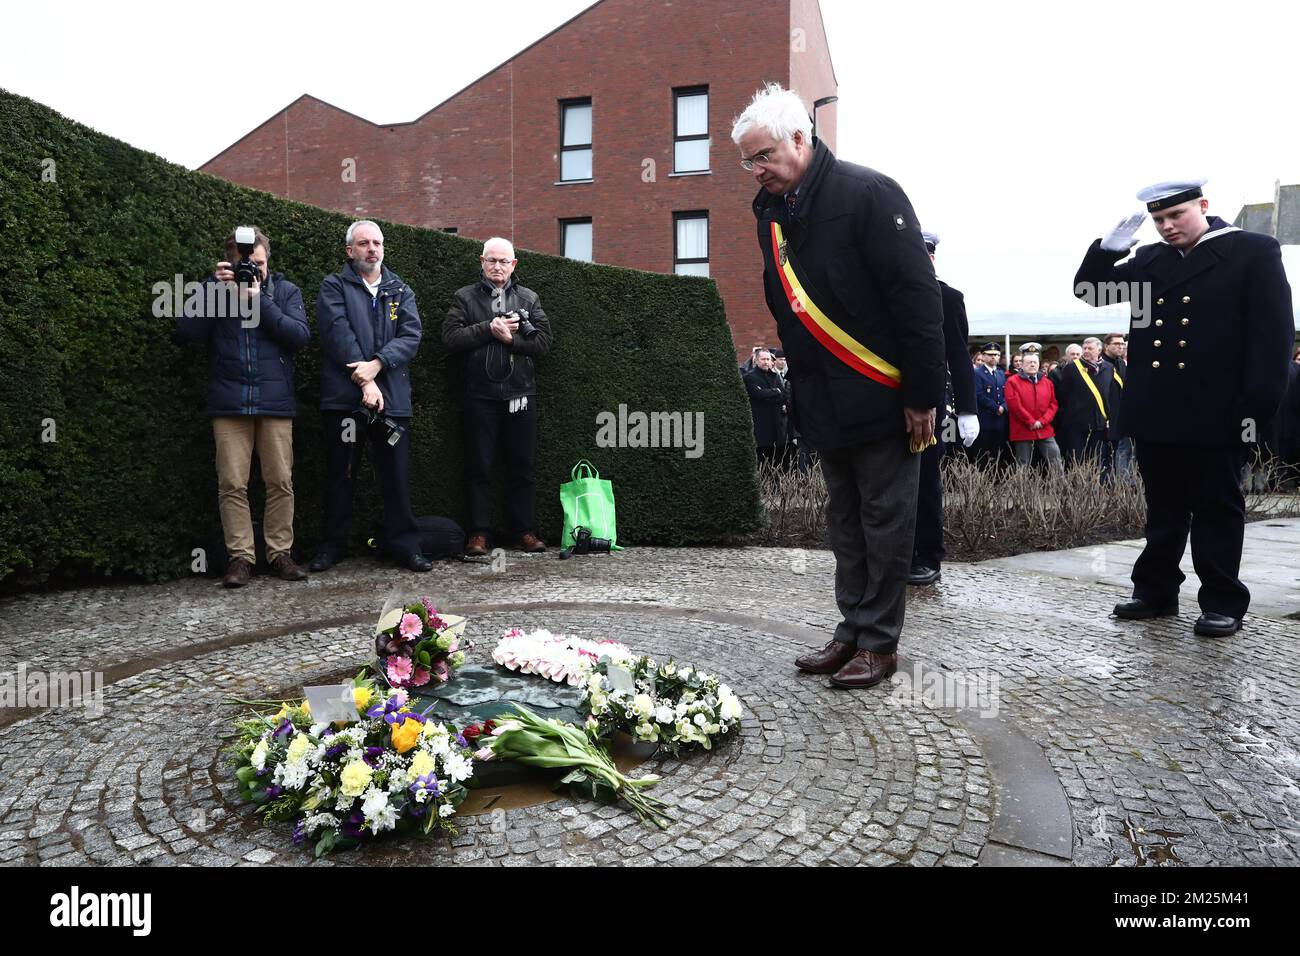 West-Flanders province governor Carl Decaluwe stands at a tribute ceremony for the 30th anniversary of the Herald of Free Enterprise ferry disaster, on Monday 06 March 2017 in Zeebrugge. On 6 March 1987 the ferry left the harbor of Zeebrugge, bound for Dover with more than 450 passengers and 80 crew members on board. It capsized just outside the harbor. The disaster, which was caused by the failure to close the bow doors, cost the life of 194 people. BELGA PHOTO KURT DESPLENTER  Stock Photo